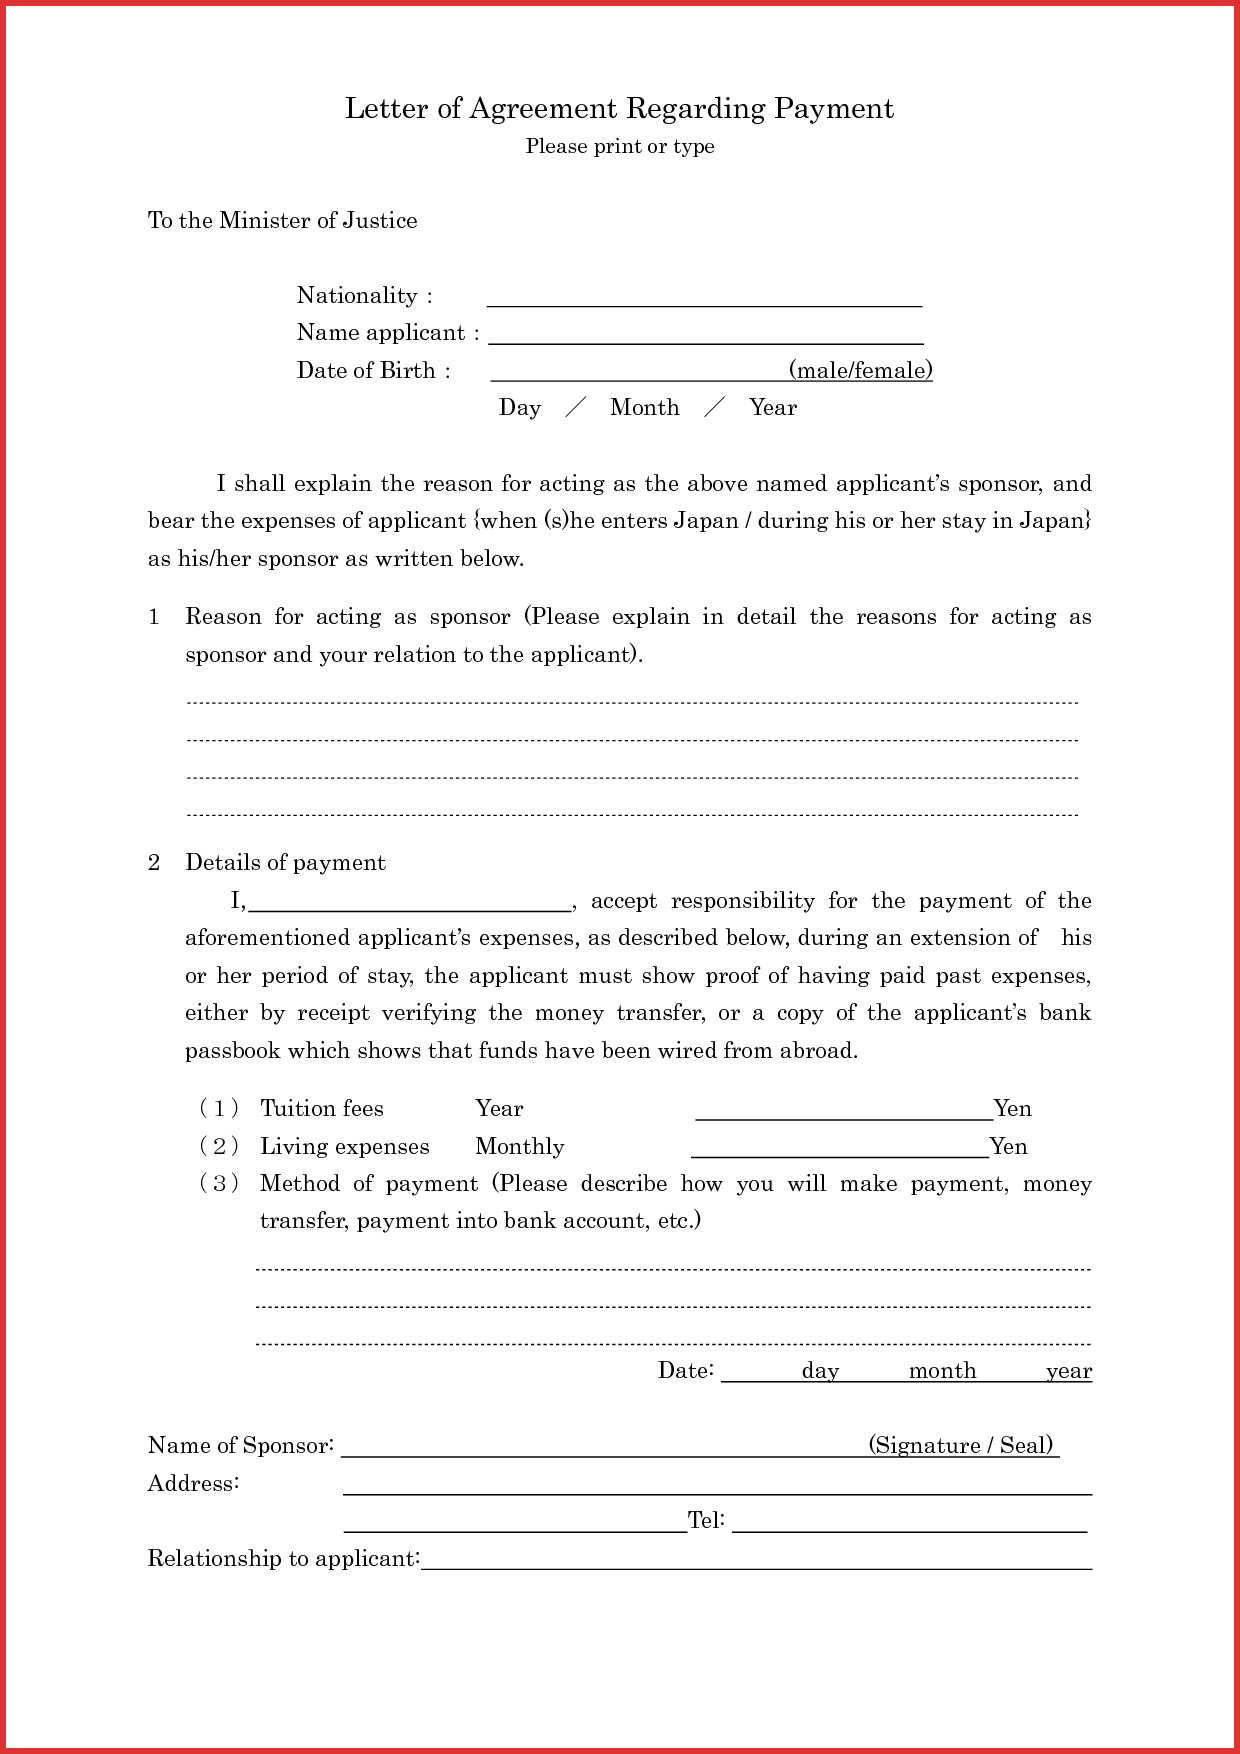 Sample Child Support Agreement Voluntary Child Support Agreement Letter Between Parents Sample